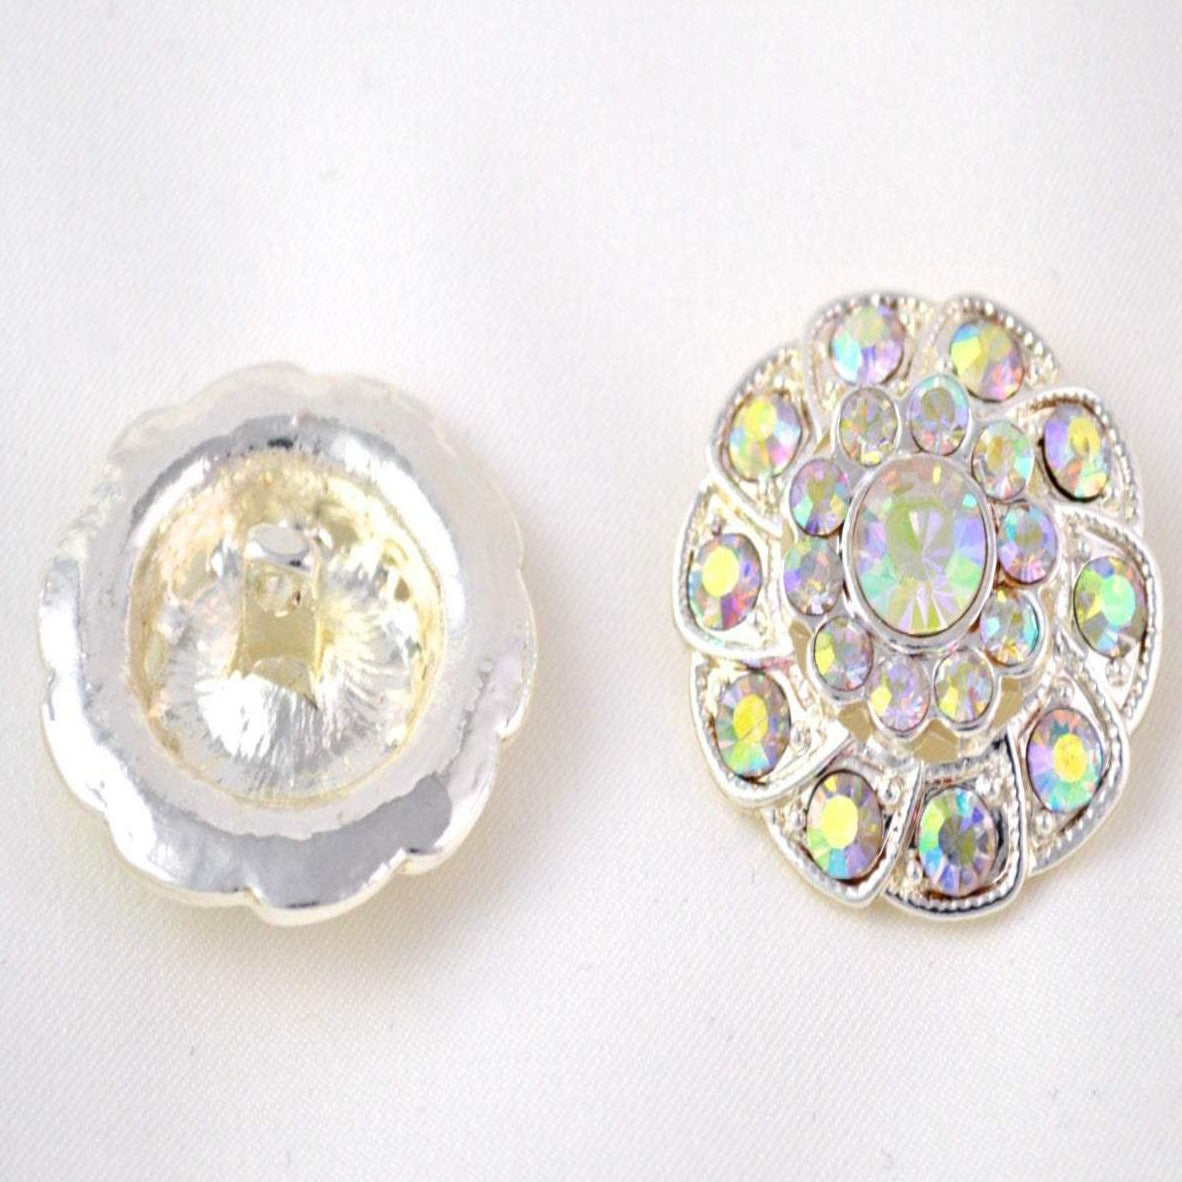 Iridescent rhinestone buttons white set in gold tone metal 25mm a set of 5